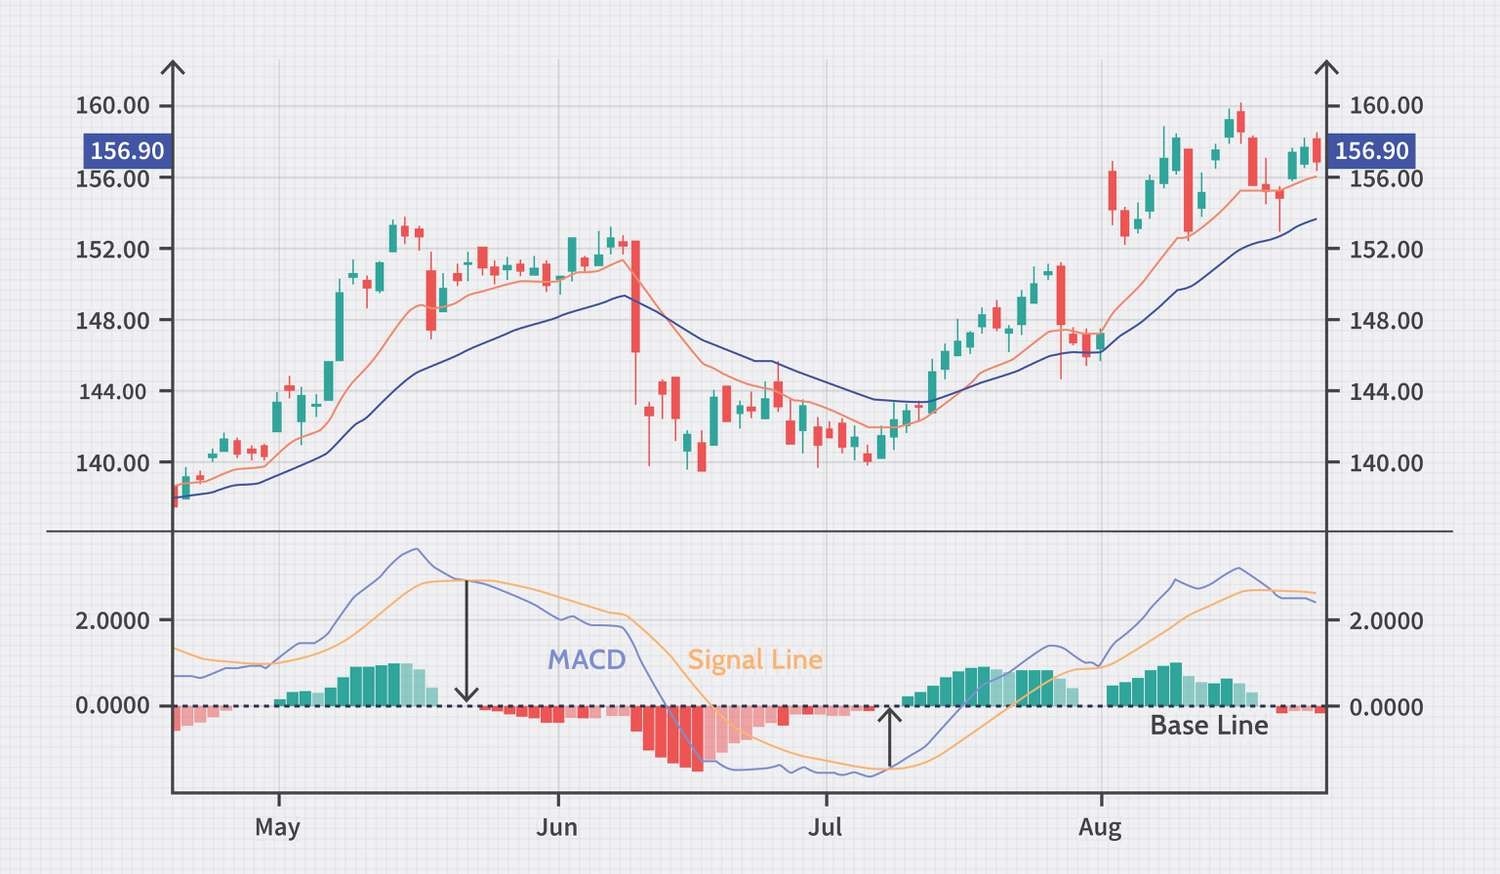 MACD(moving average convergence divergence)